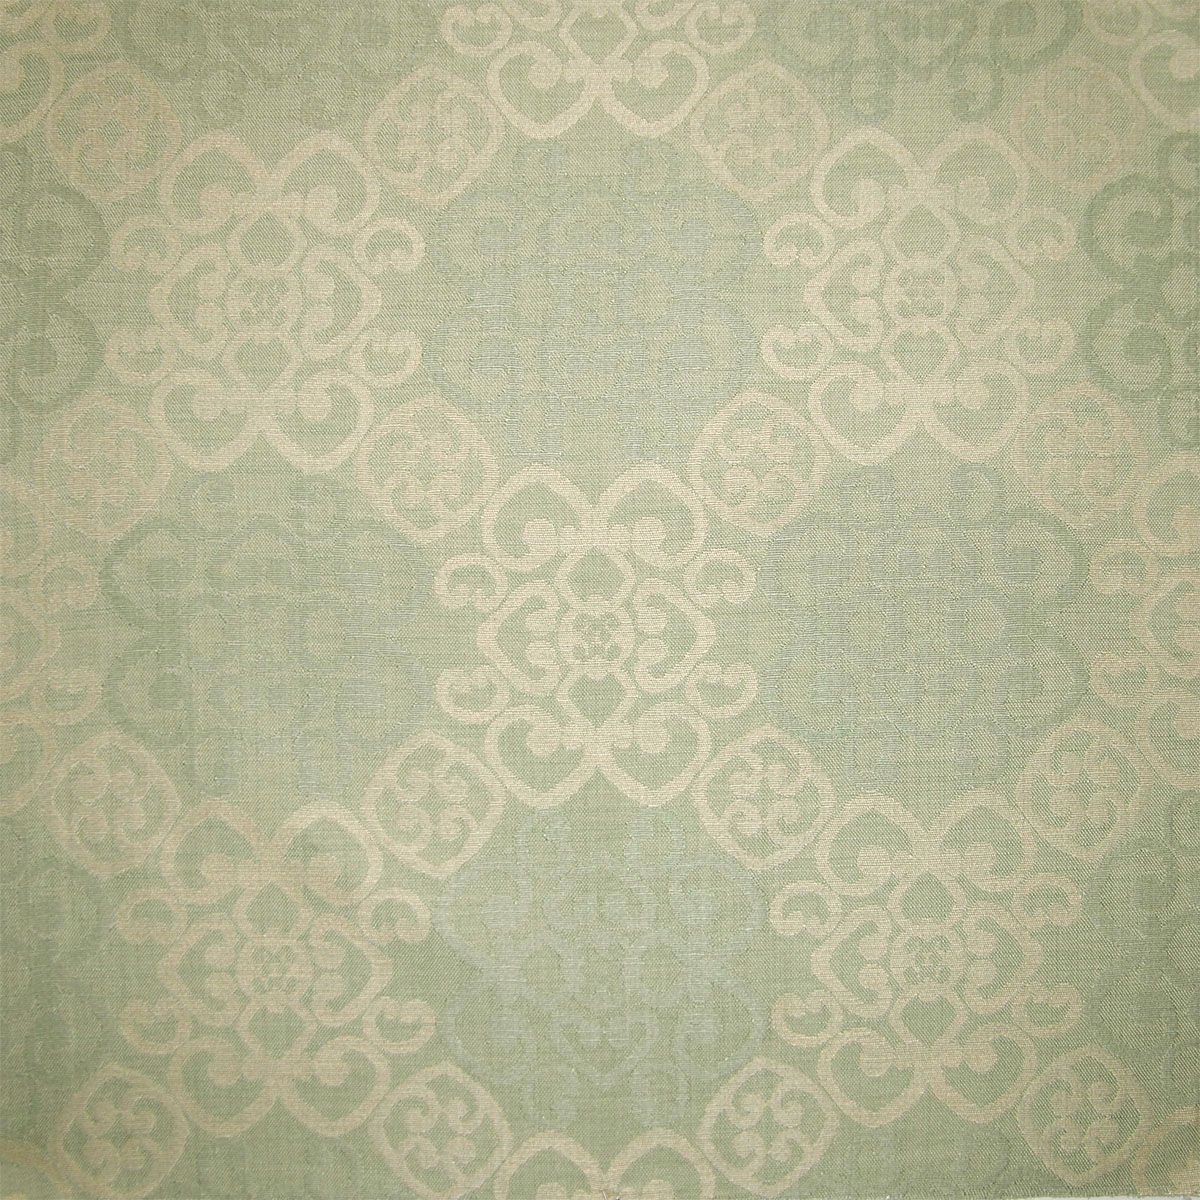 Charlevoix fabric in salisbury green color - pattern number M8 00049138 - by Scalamandre in the Old World Weavers collection